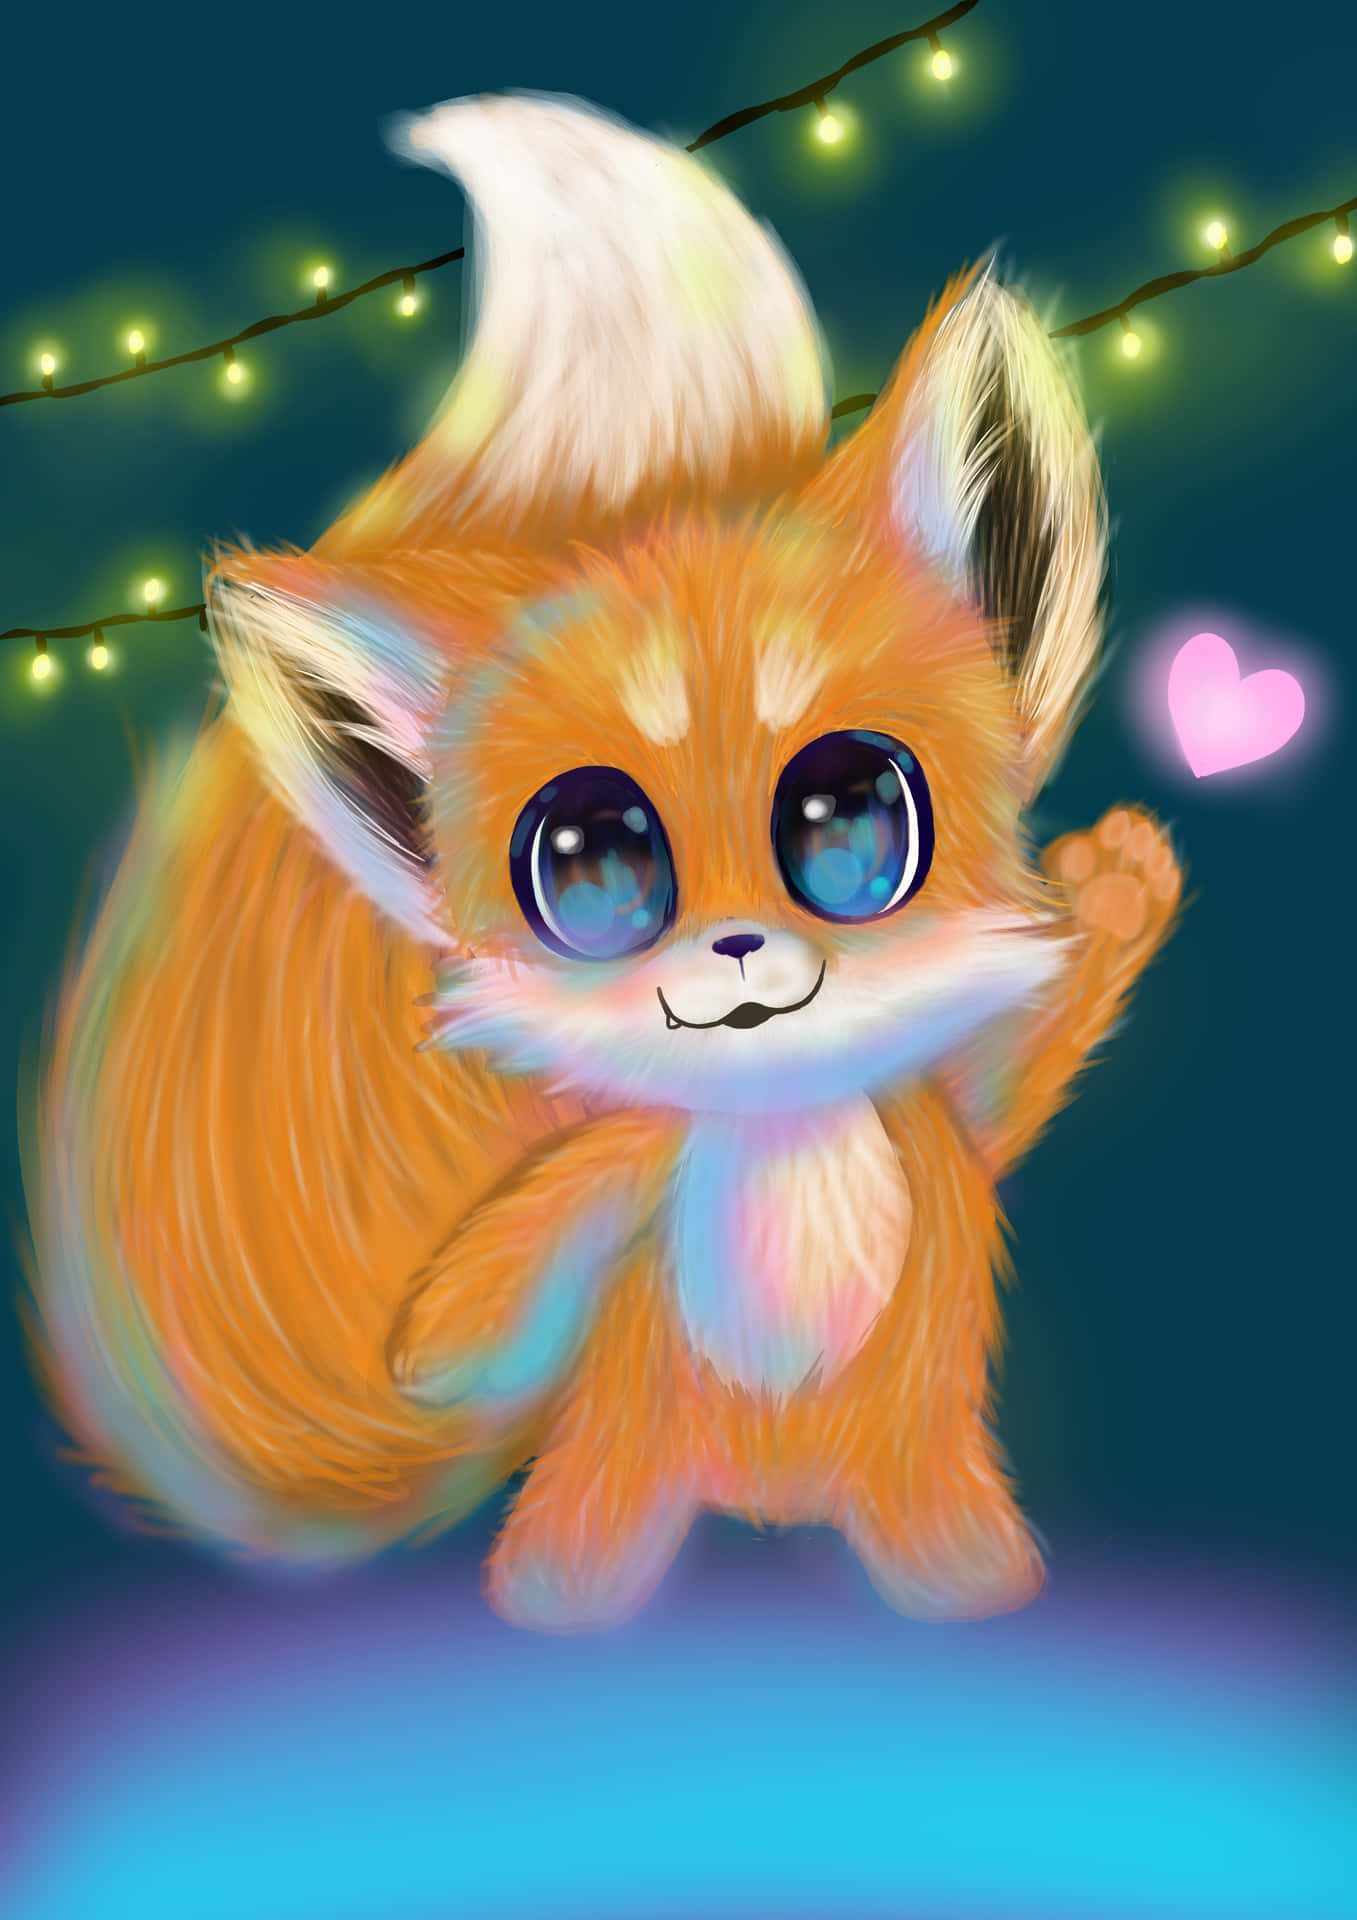 Cool Anime Fox With Adorable Eyes Wallpaper